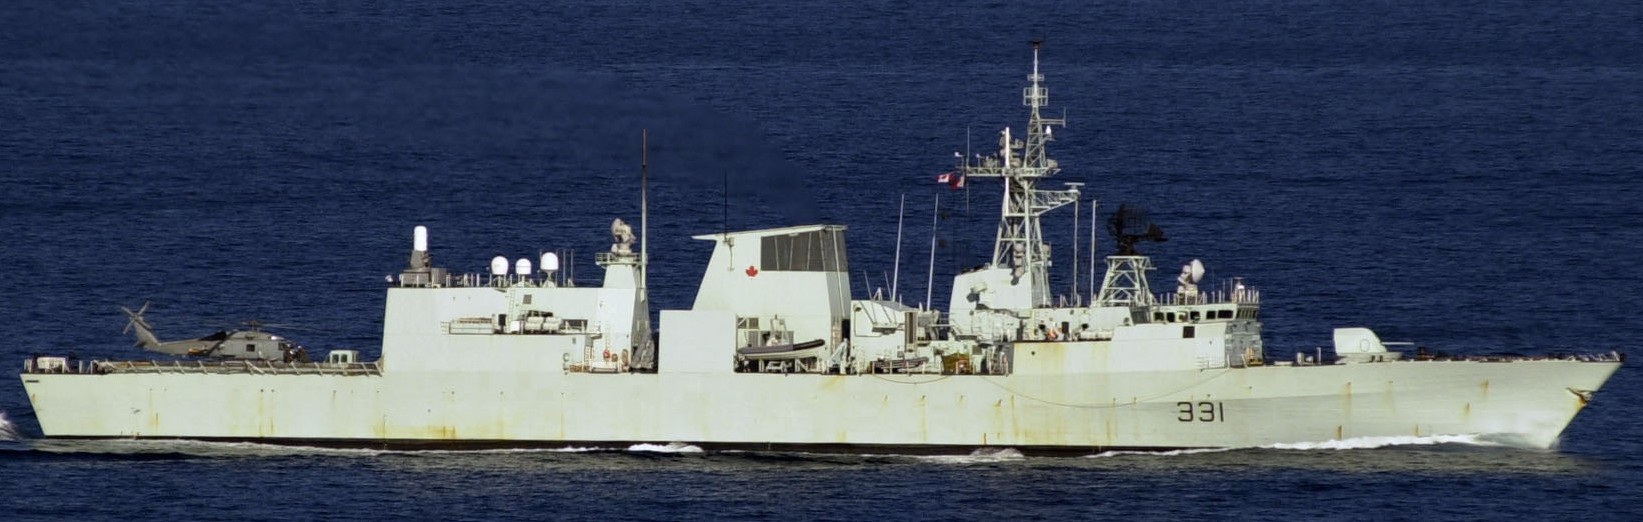 ffh-331 hmcs vancouver halifax class helicopter patrol frigate ncsm royal canadian navy 31